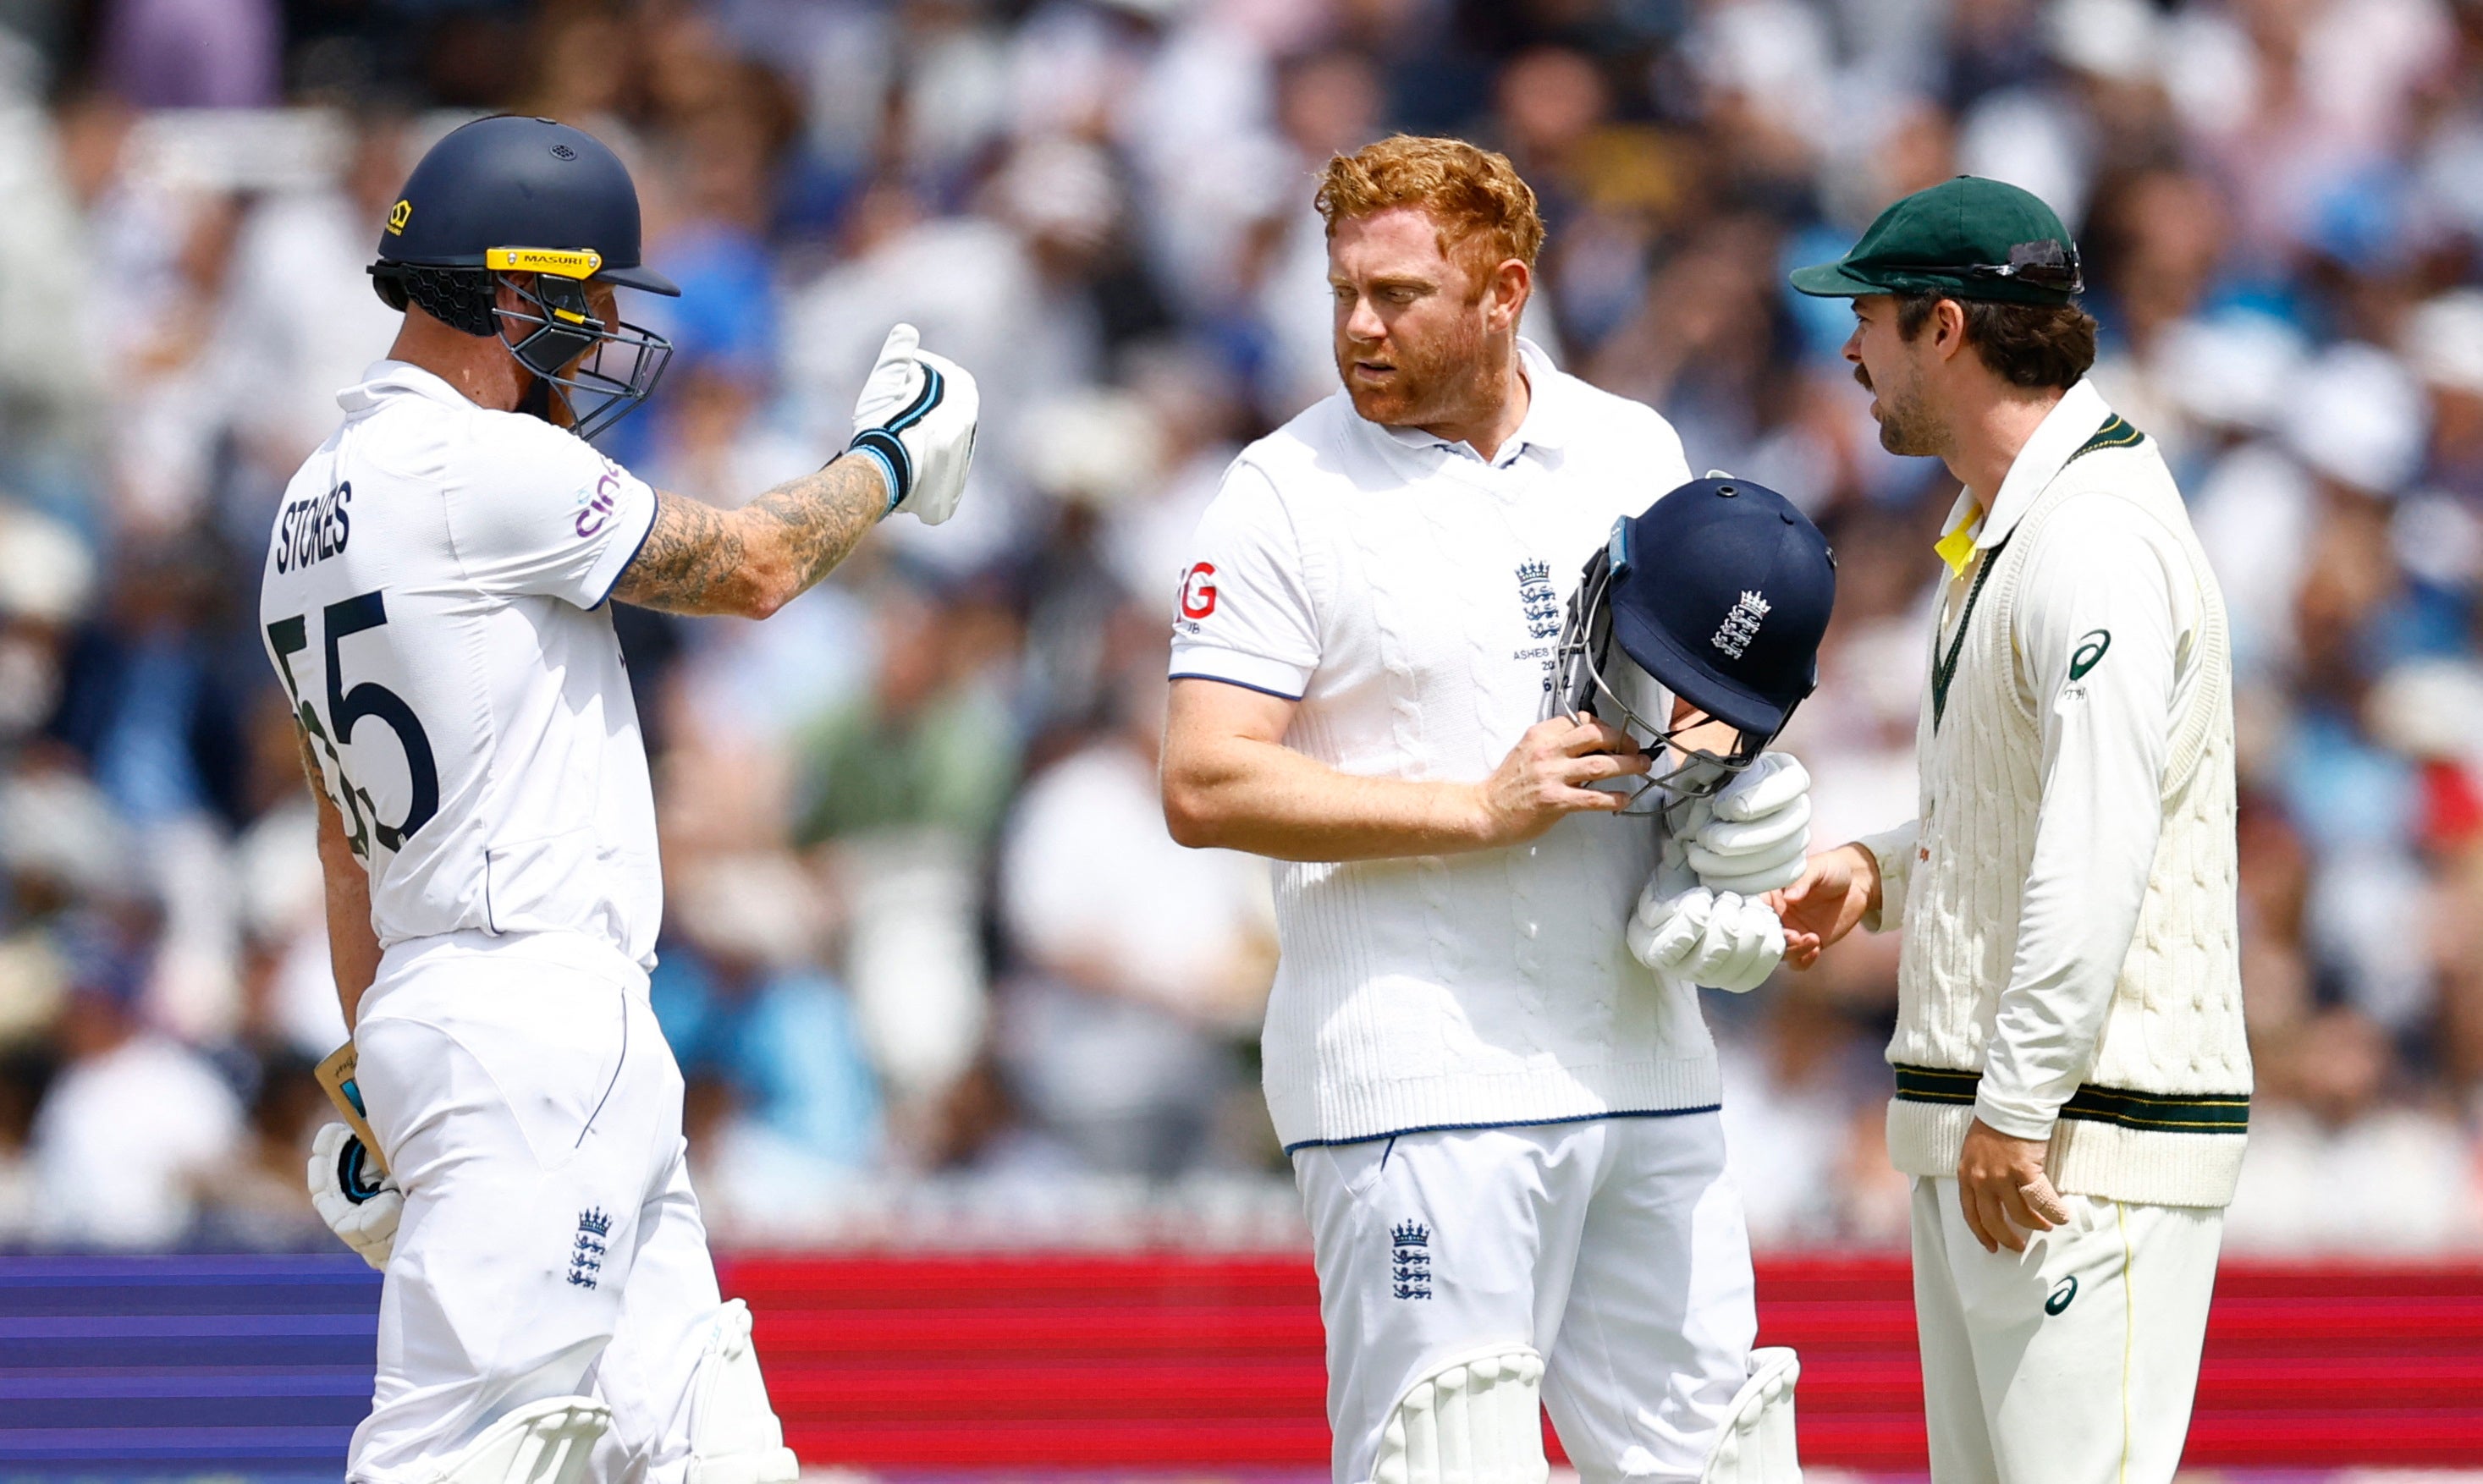 Jonny Bairstow was unimpressed after being controversially stumped